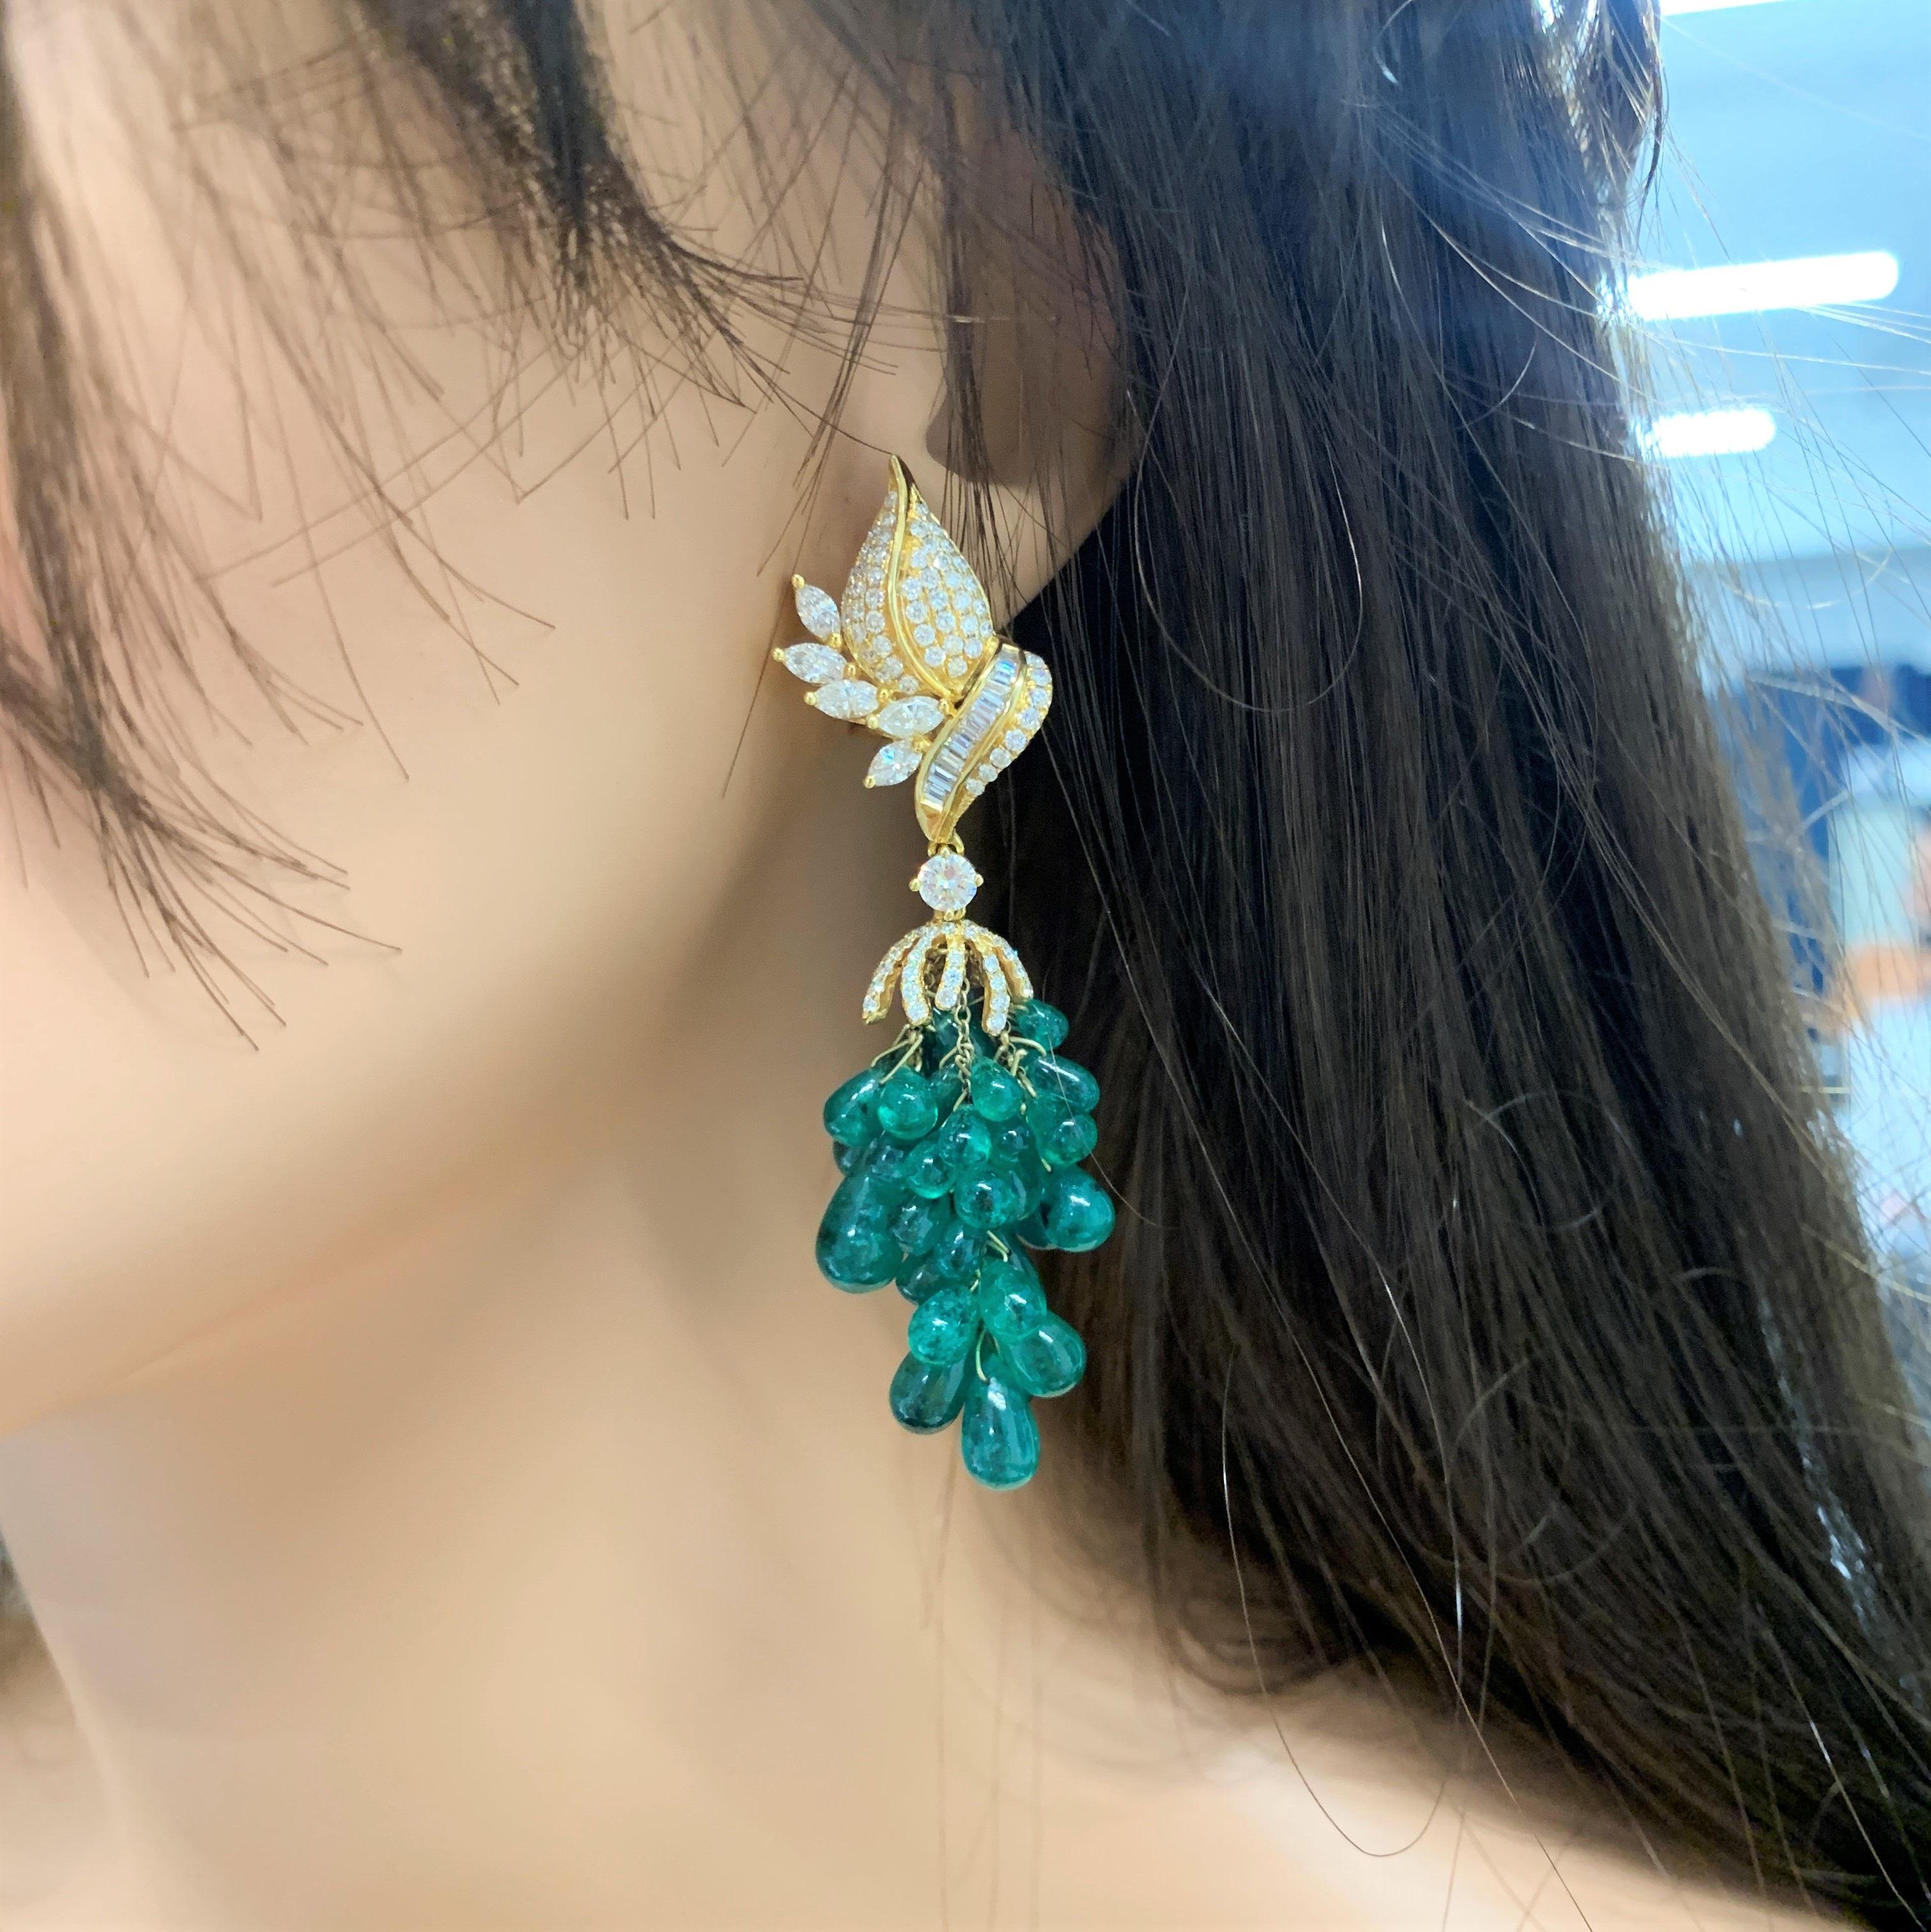 These hand-designed brightly polished 18k yellow gold nature-inspired garden dangle earrings drip with a decadent amount of fine quality emerald briolette beads that are set on the bottom in bunches totaling 70.00 carats. These incredible Colombian